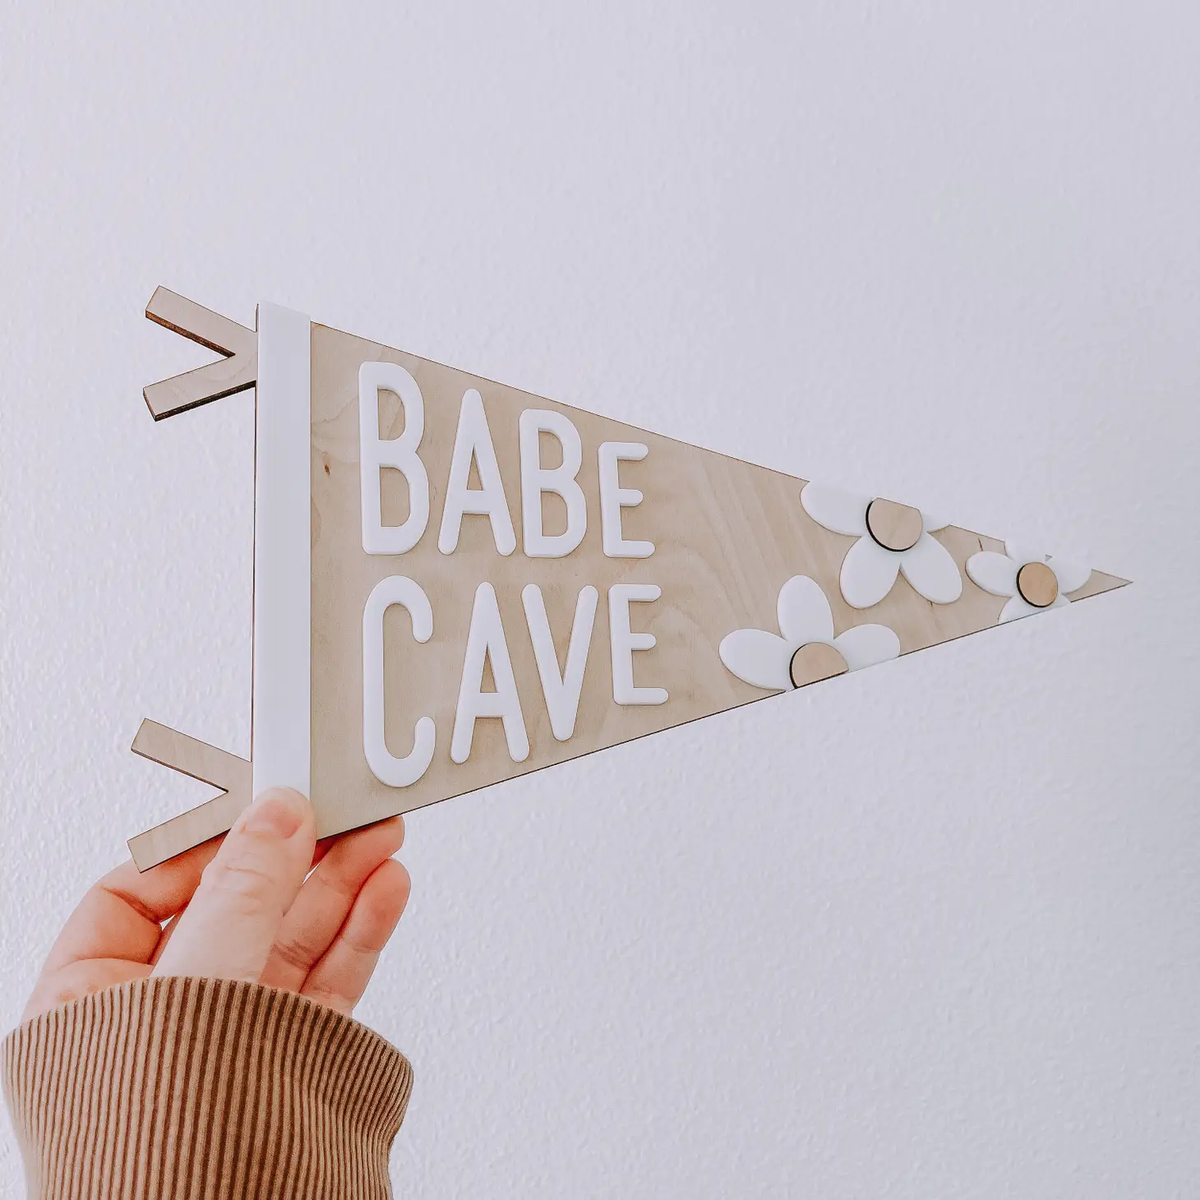 Babe Cave Pennant Banner